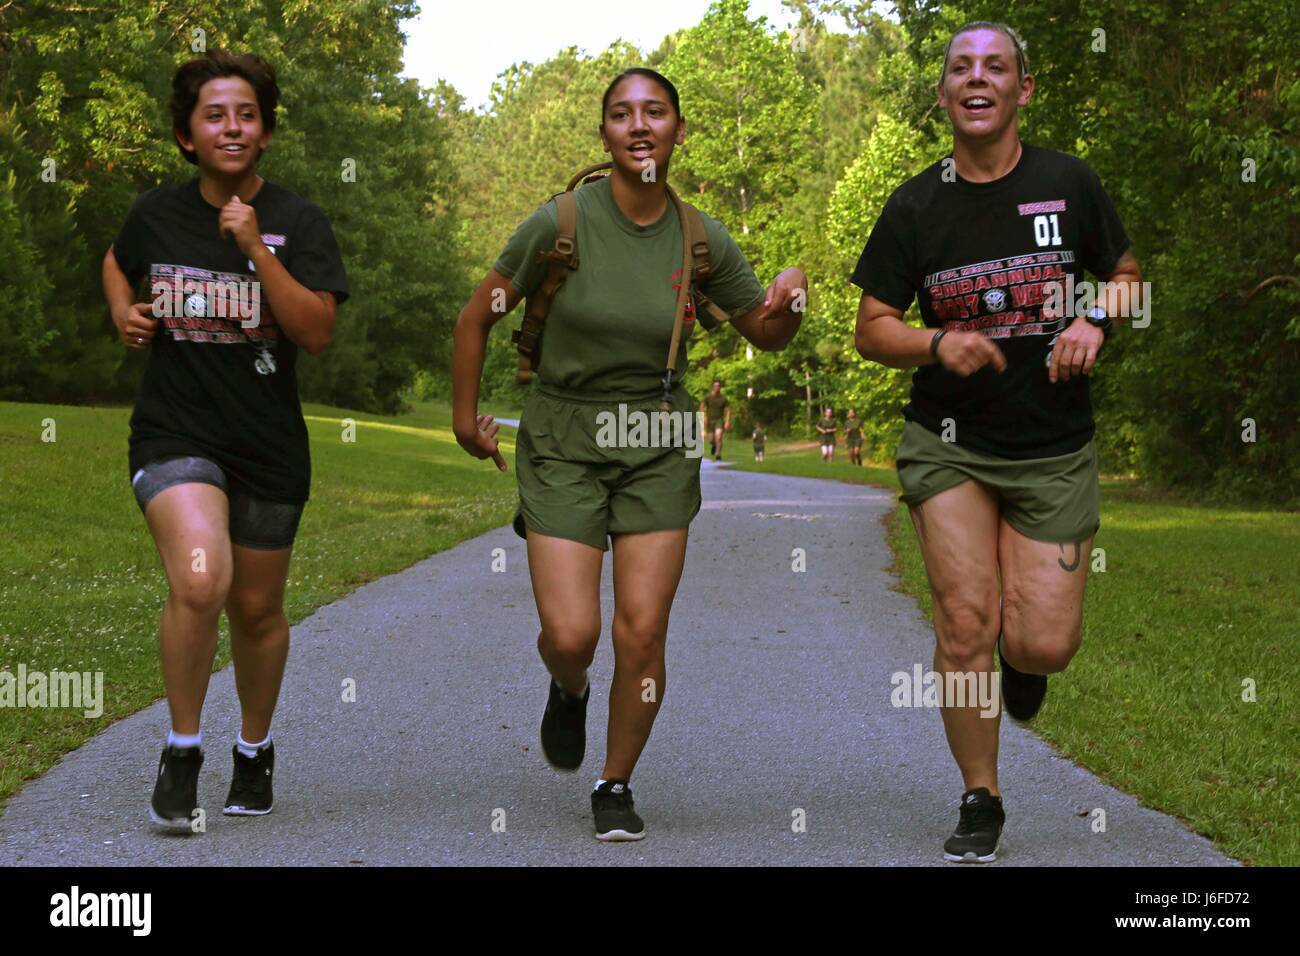 U.S. Marine Corps combat camera personnel from various units within the geographical area, participate in a memorial run to honor fallen combat camera members, Camp Lejeune, N.C., May 11, 2017. Cpl. Sara Medina, a combat photographer, and Lance Cpl. Jacob Hug, a combat videographer, gave the ultimate sacrifice while providing humanitarian assistance and disaster relief to remote villages in Nepal in dire need of aid during Operation Sahayogi Haat. (U.S. Marine Corps photo by Lance Cpl. Kaitlynn M. Hendricks, MCIEAST Combat Camera/Released) Stock Photo